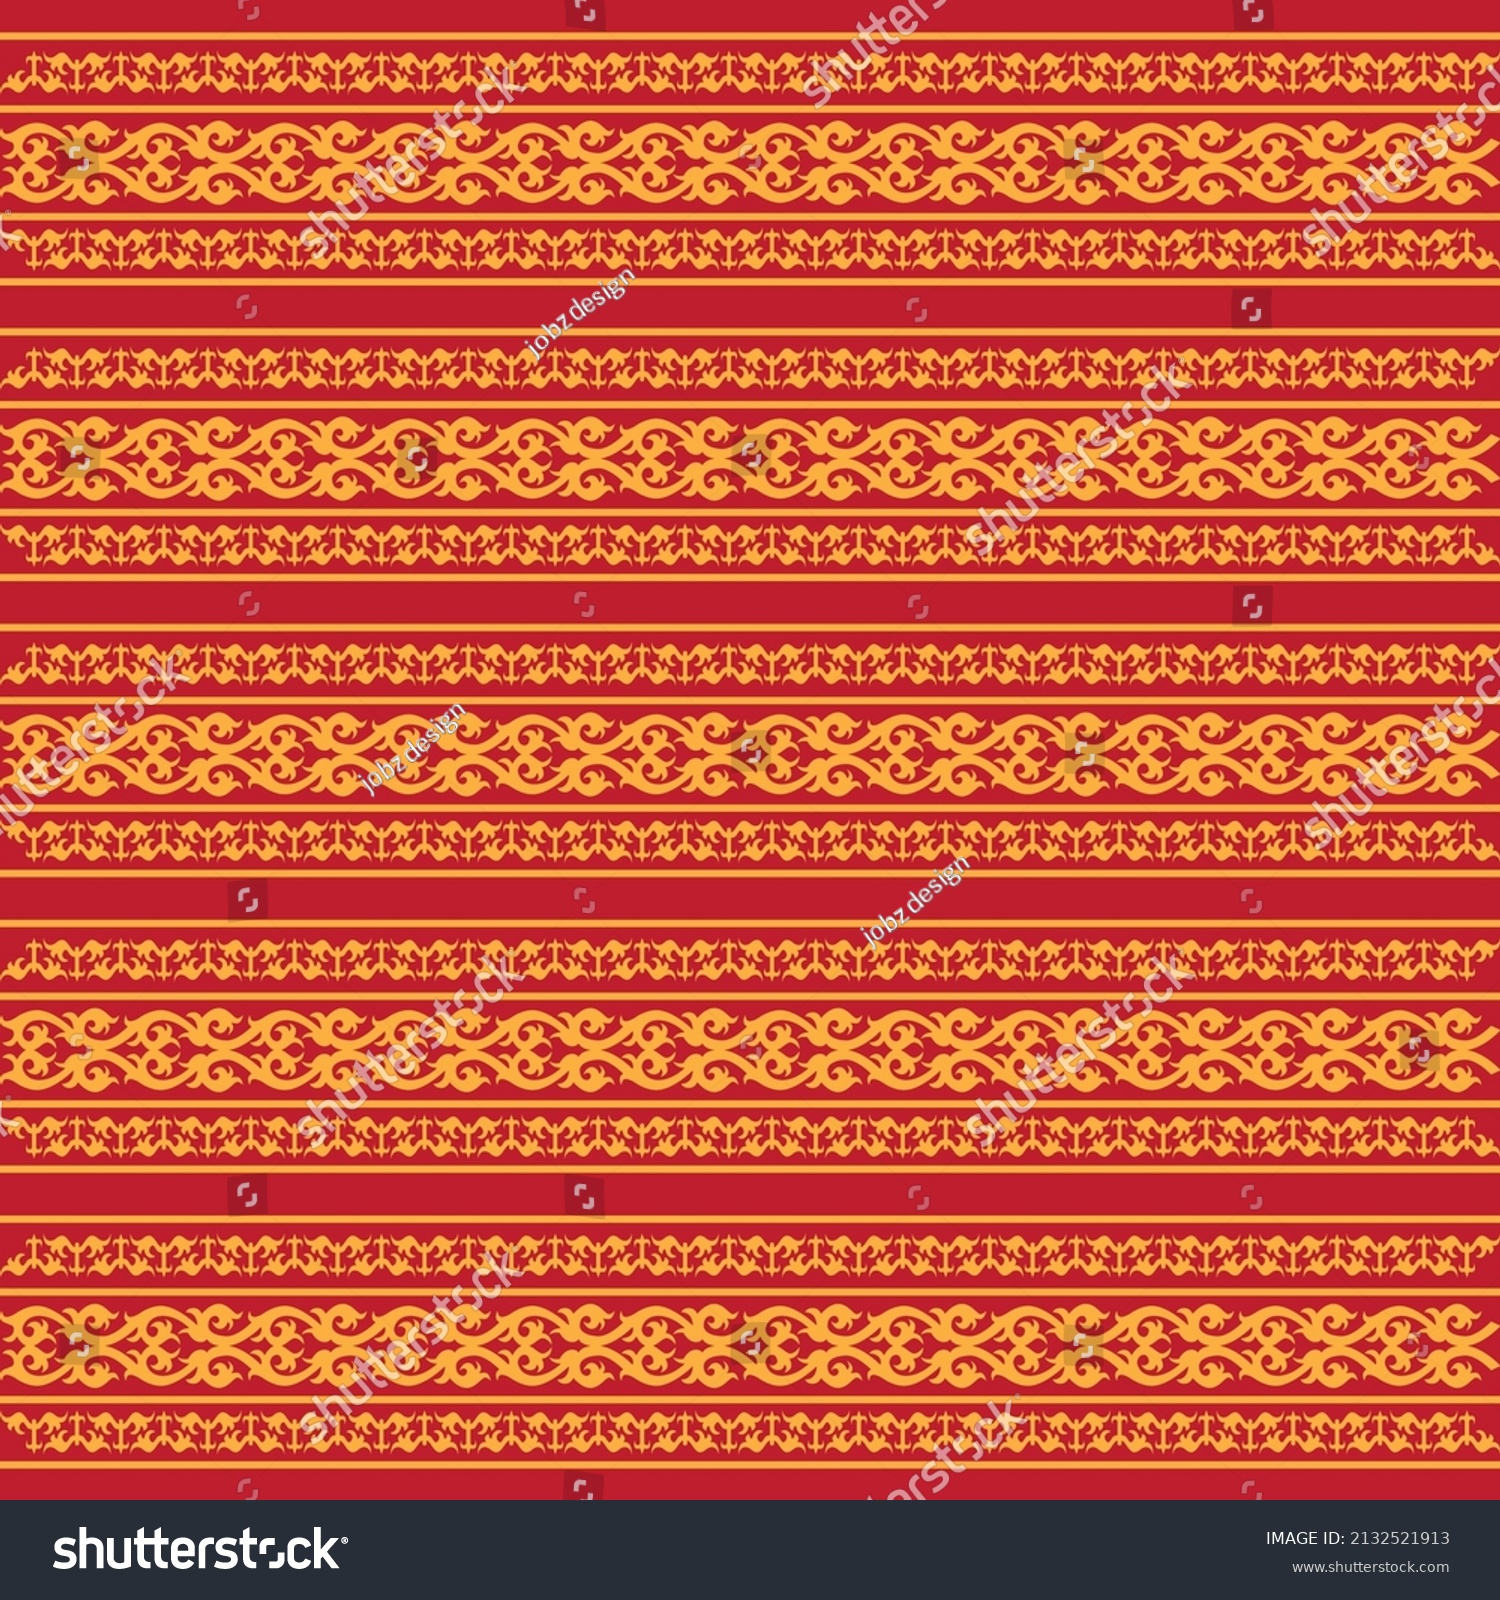 SVG of traditional pattern aceh indonesia with gold color and red maroon background svg